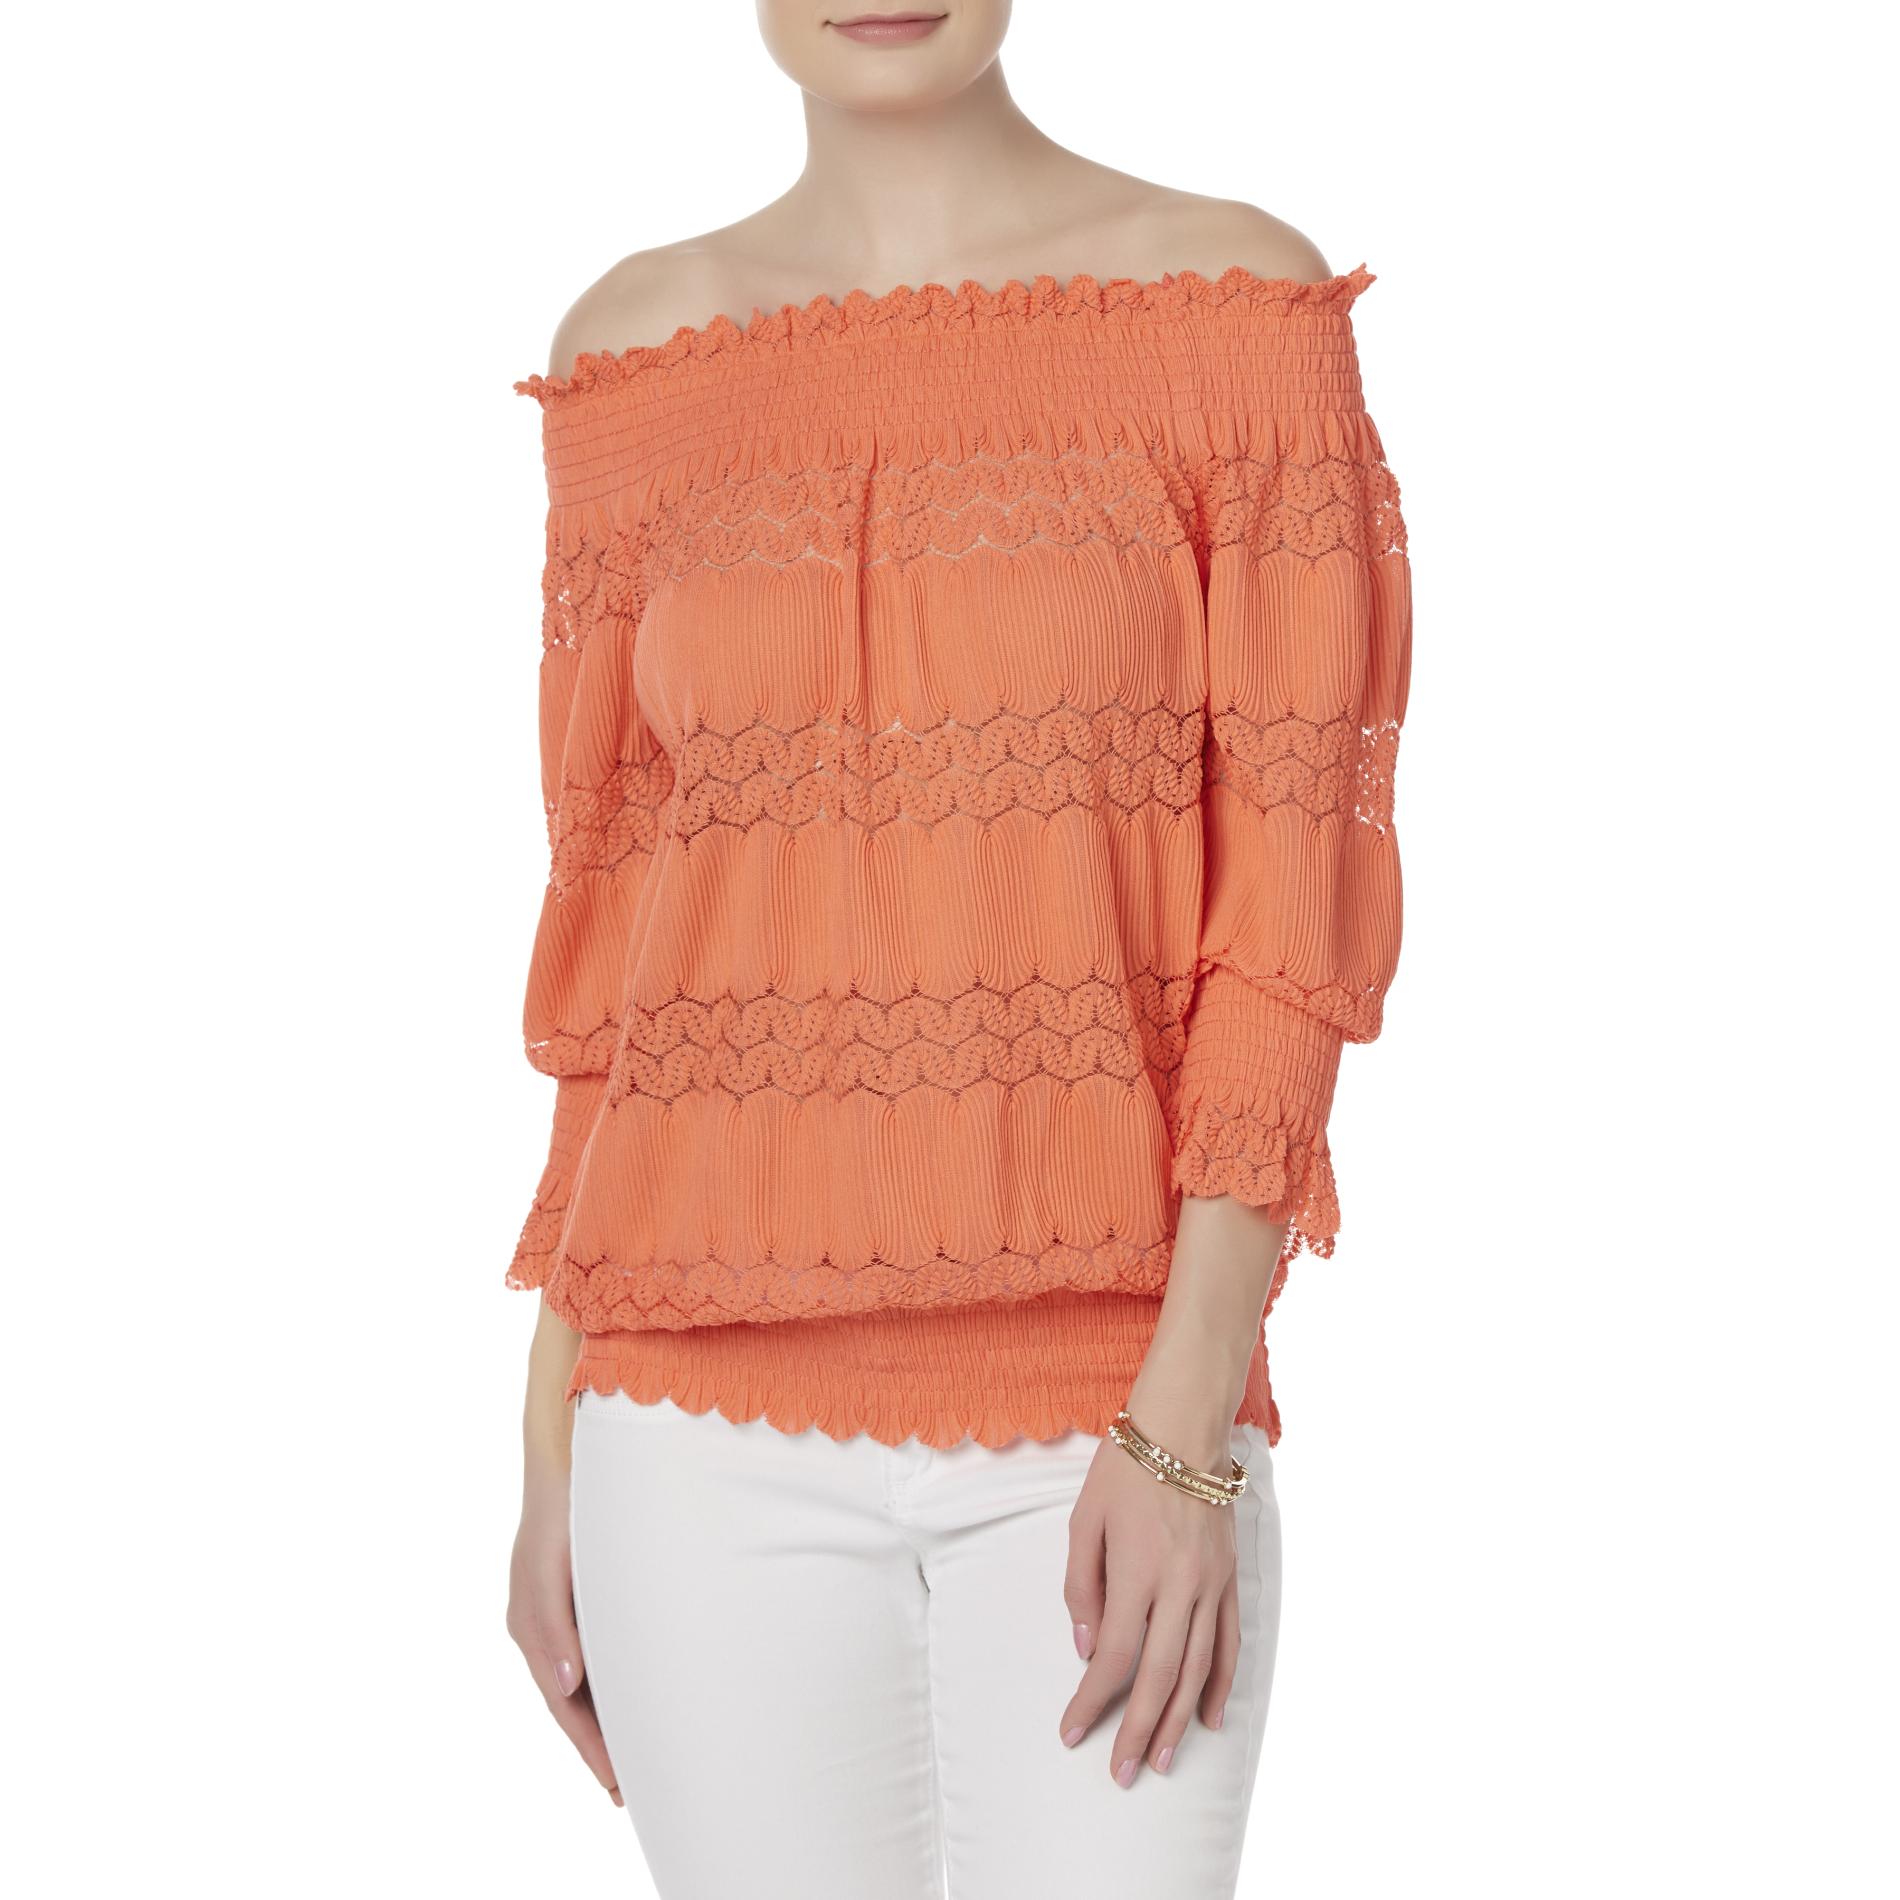 Simply Styled Women's Off-the-Shoulder Peasant Top